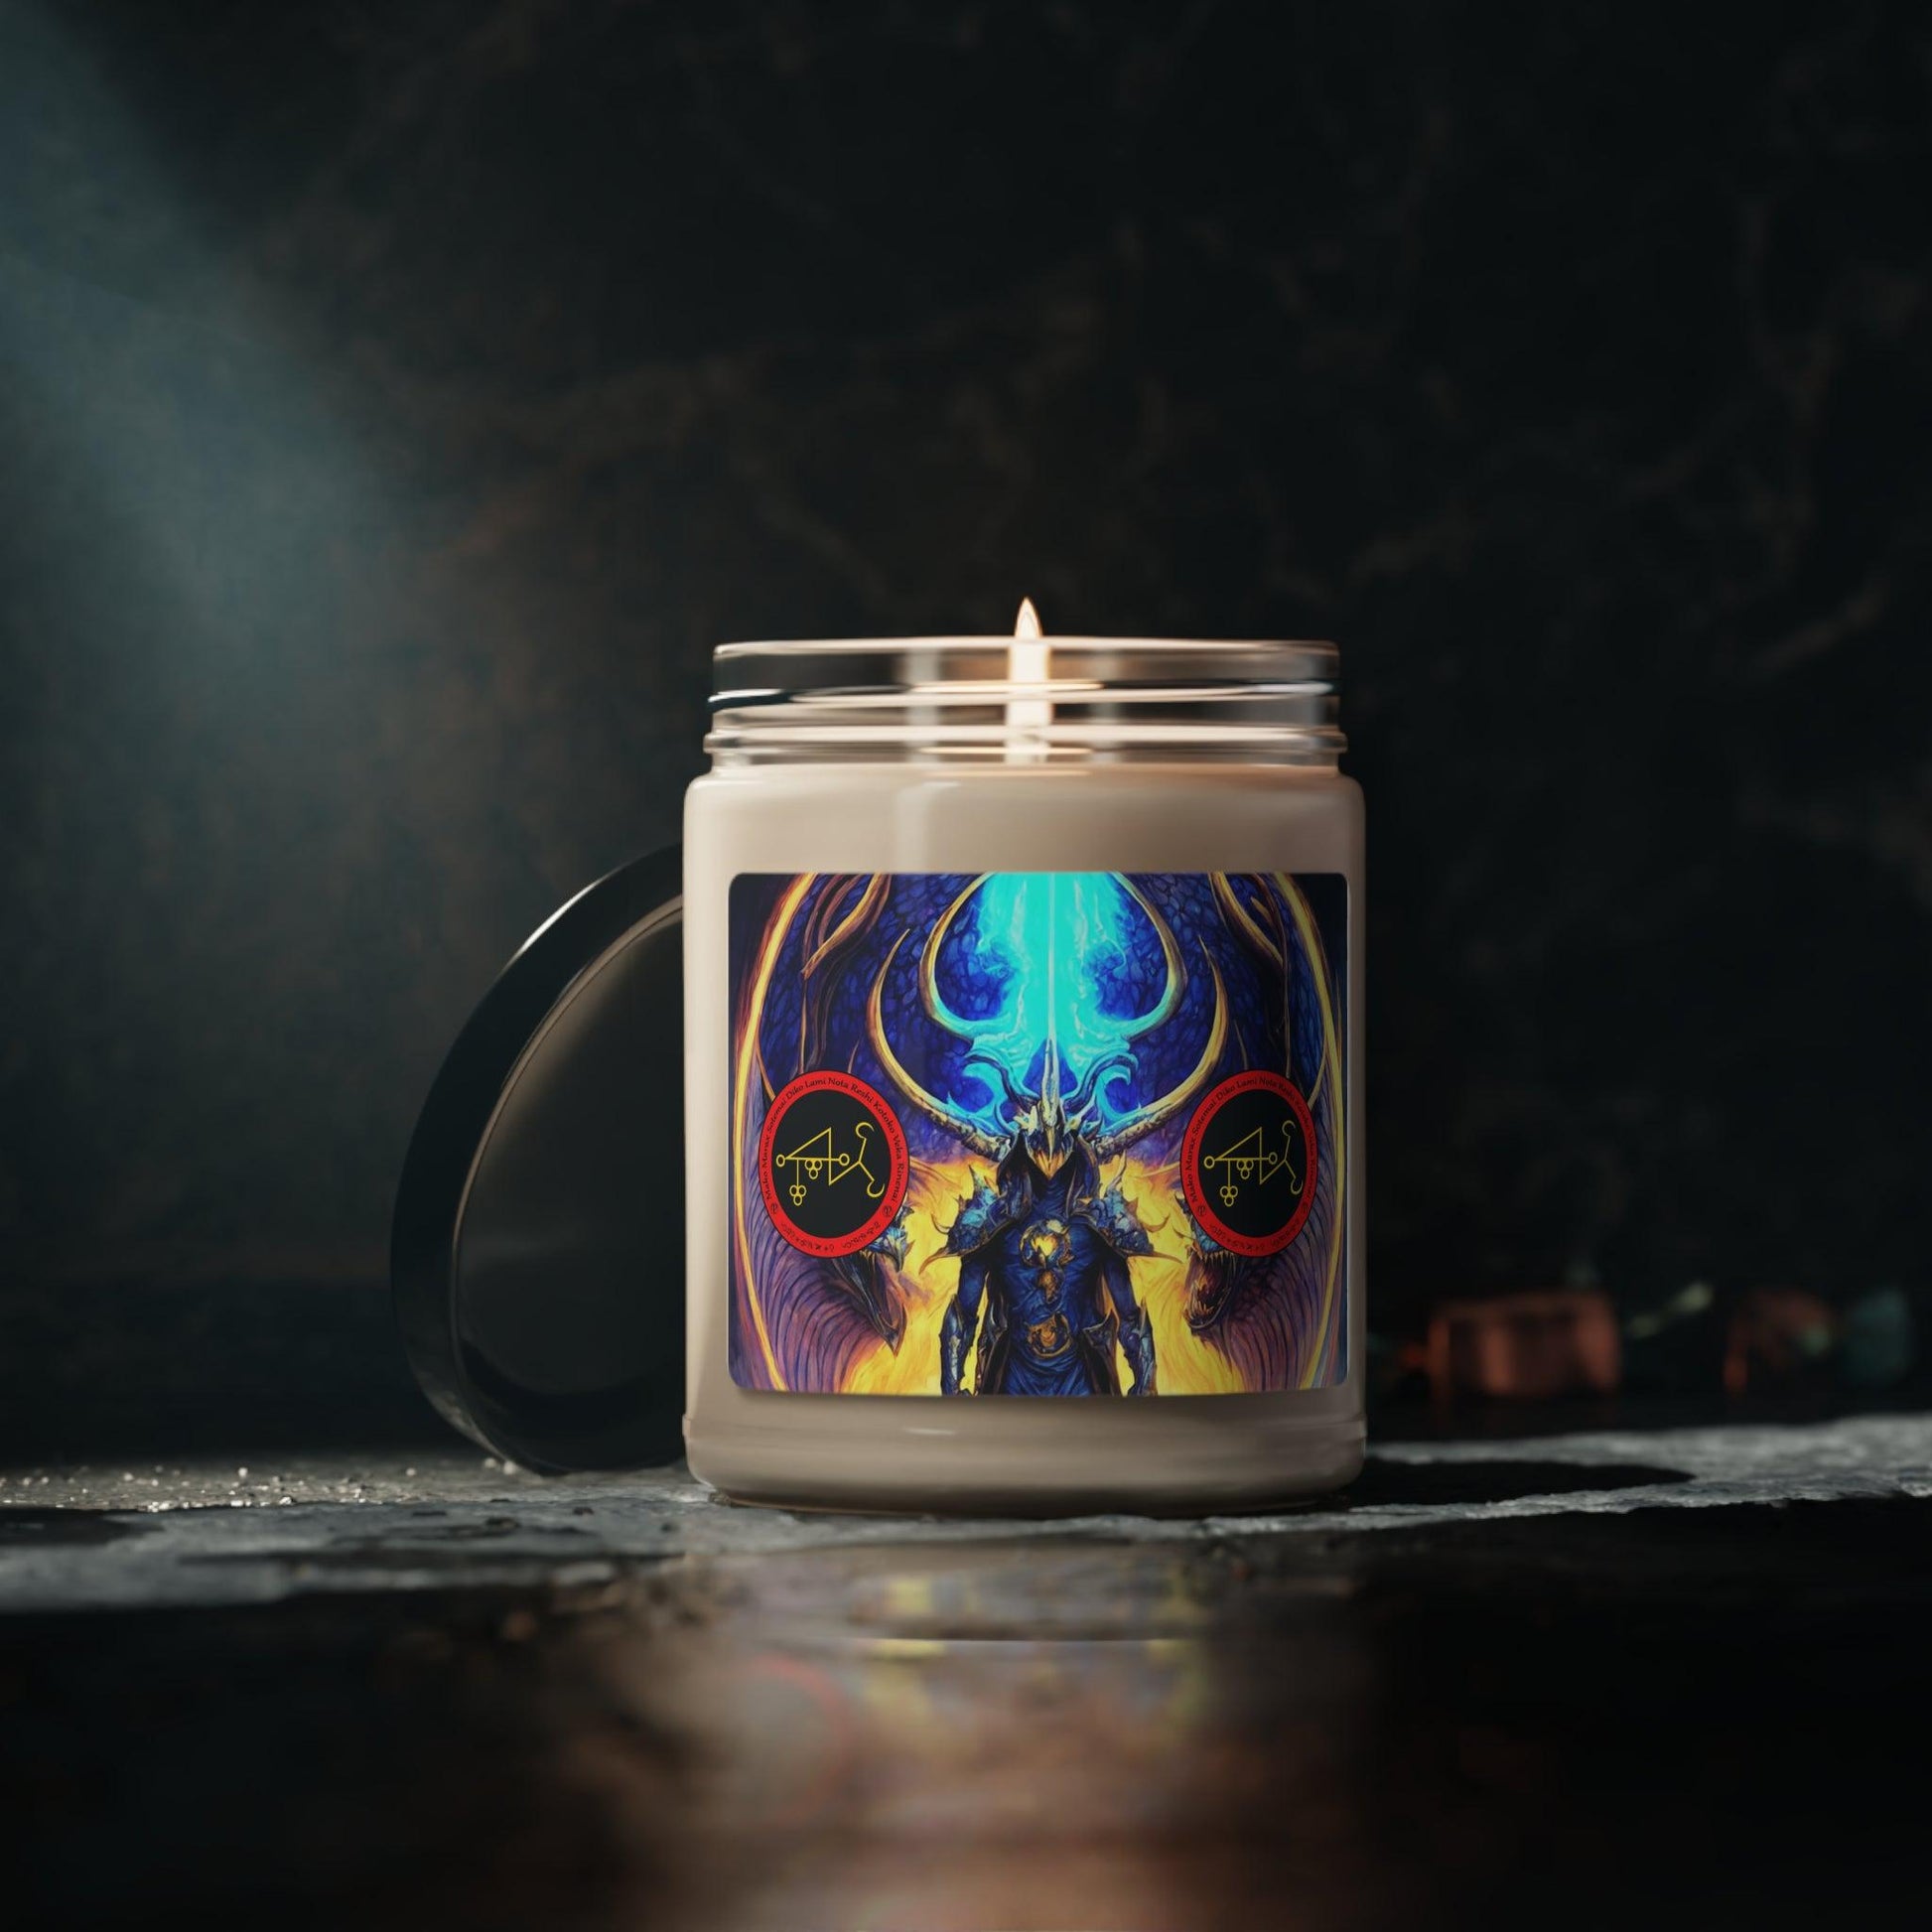 Demon-Marax-Altar-Scented-Soy-Candle-To-Learn-Magic-and-witchcraft-in-offerings-rituals-initiations-or-praying-and-meditation-20